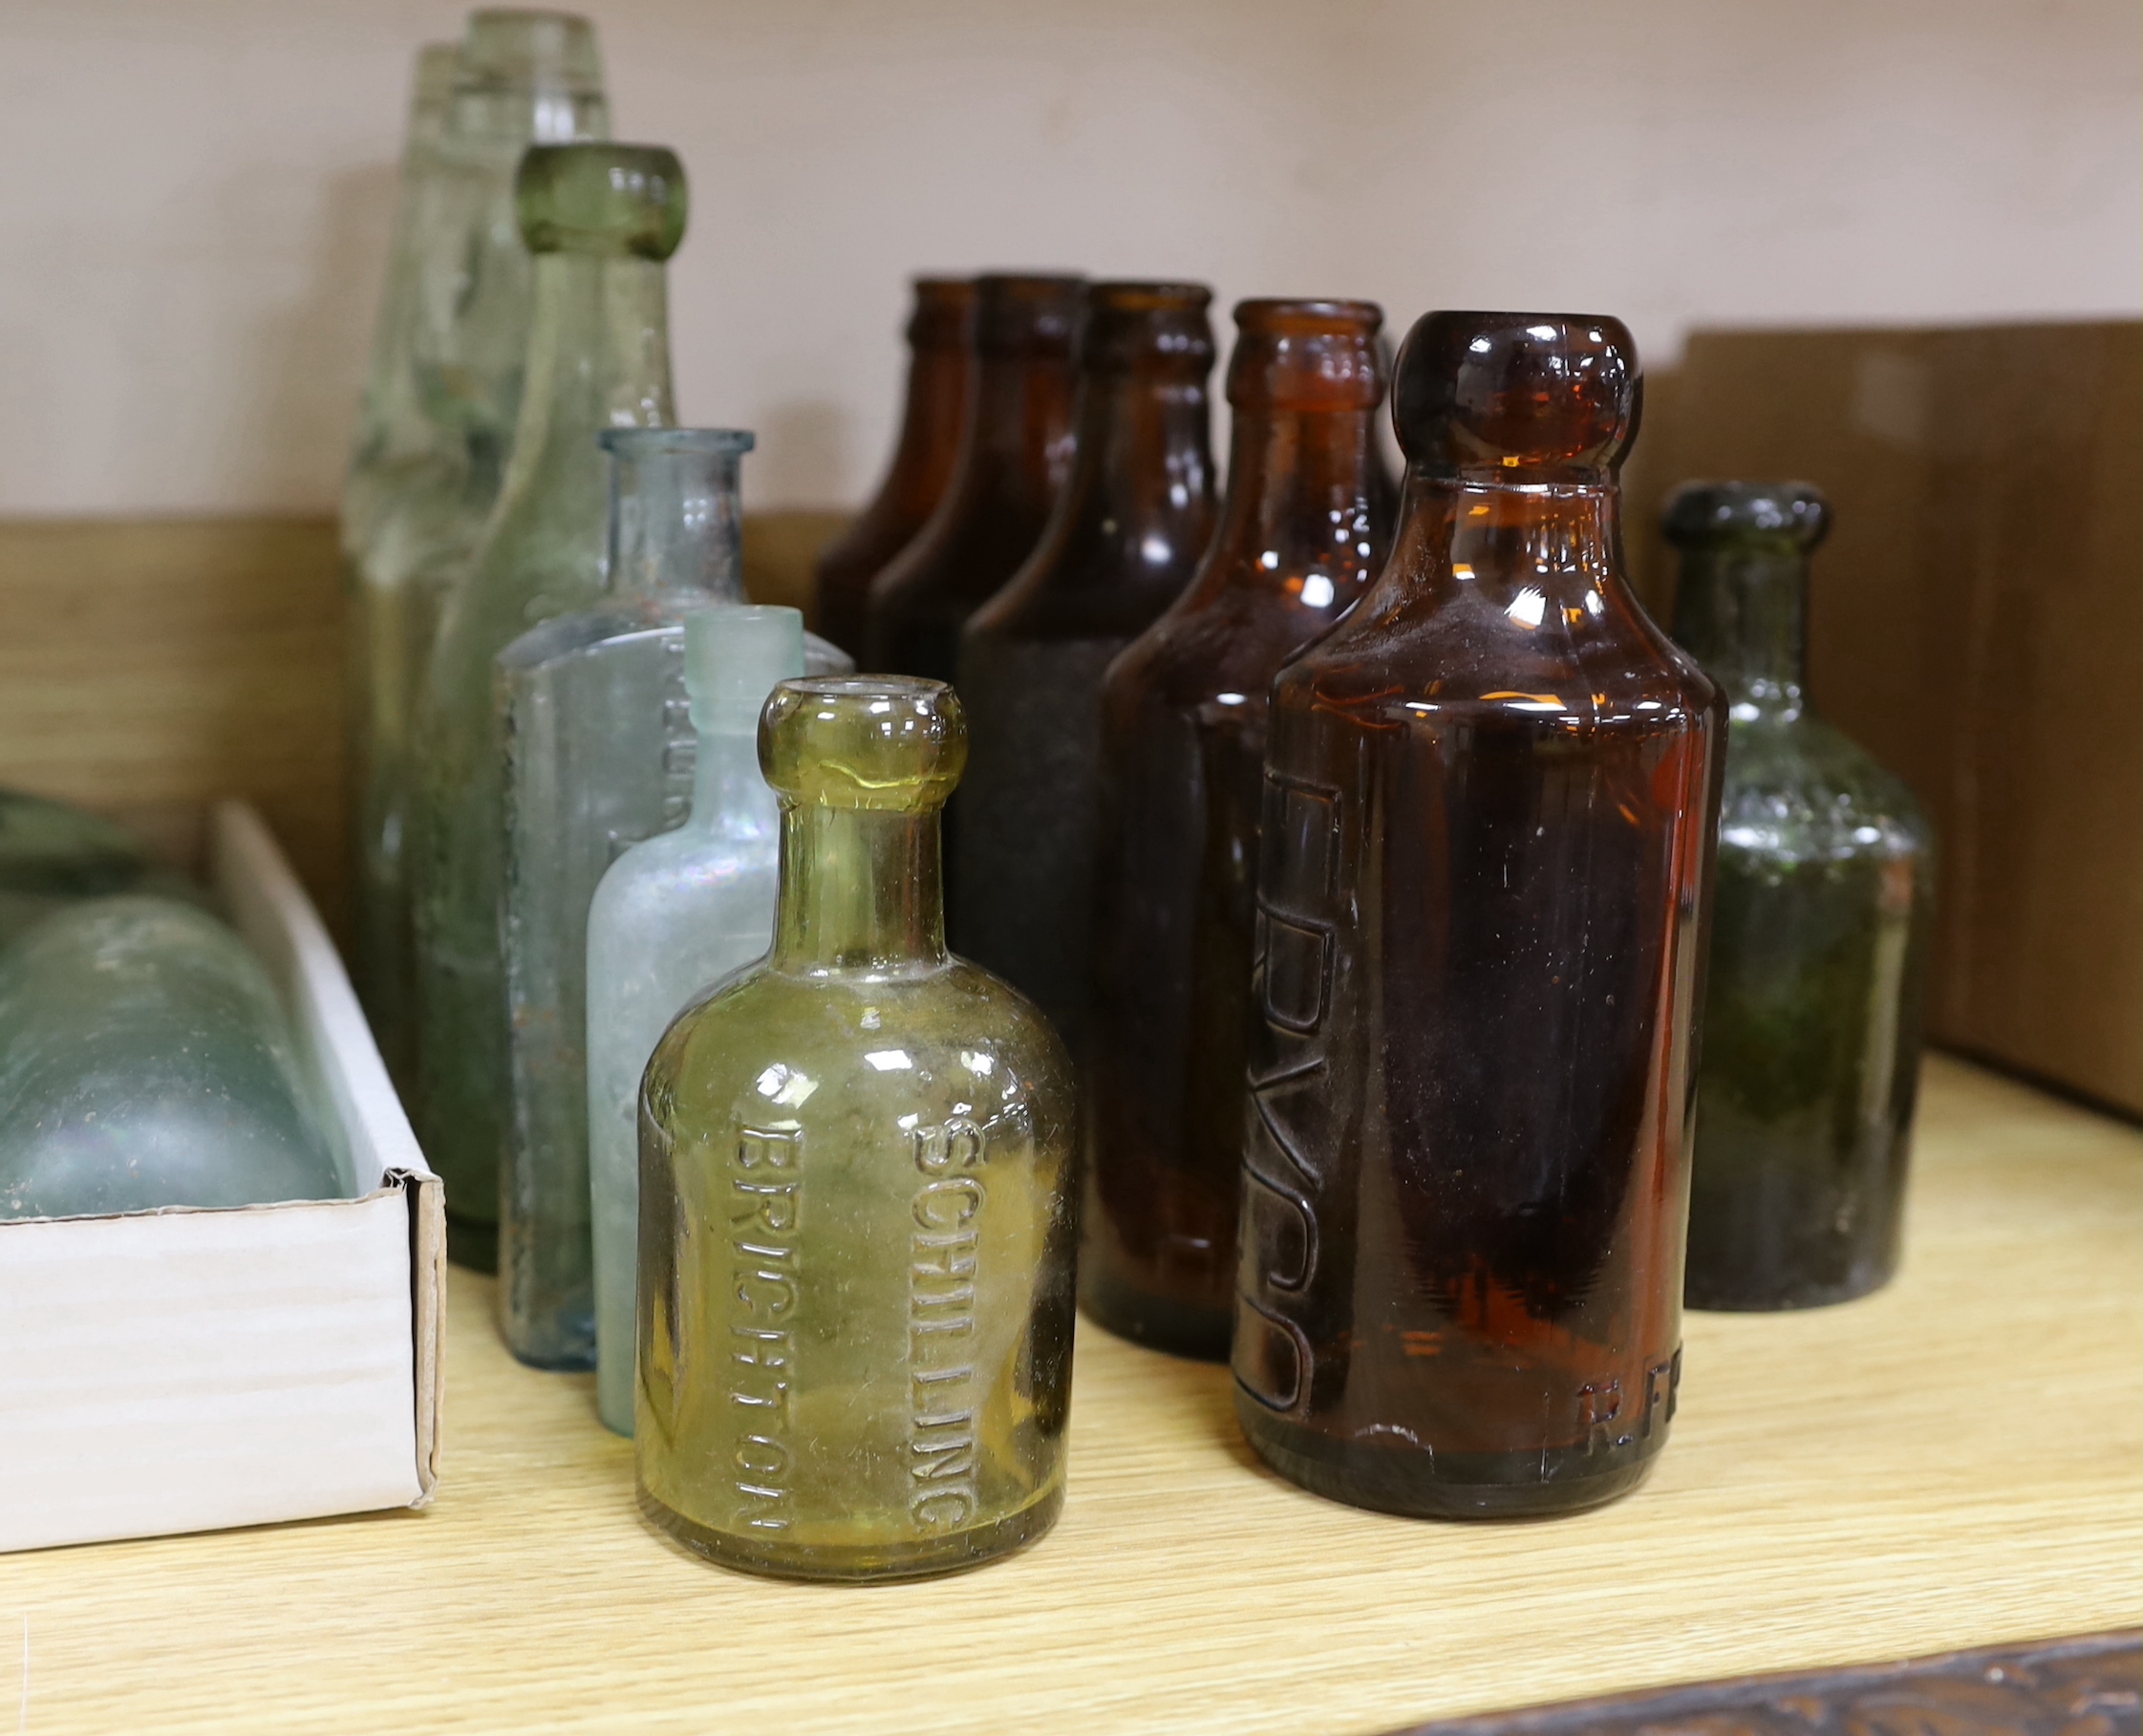 A quantity of early to mid 20th century glass bottles